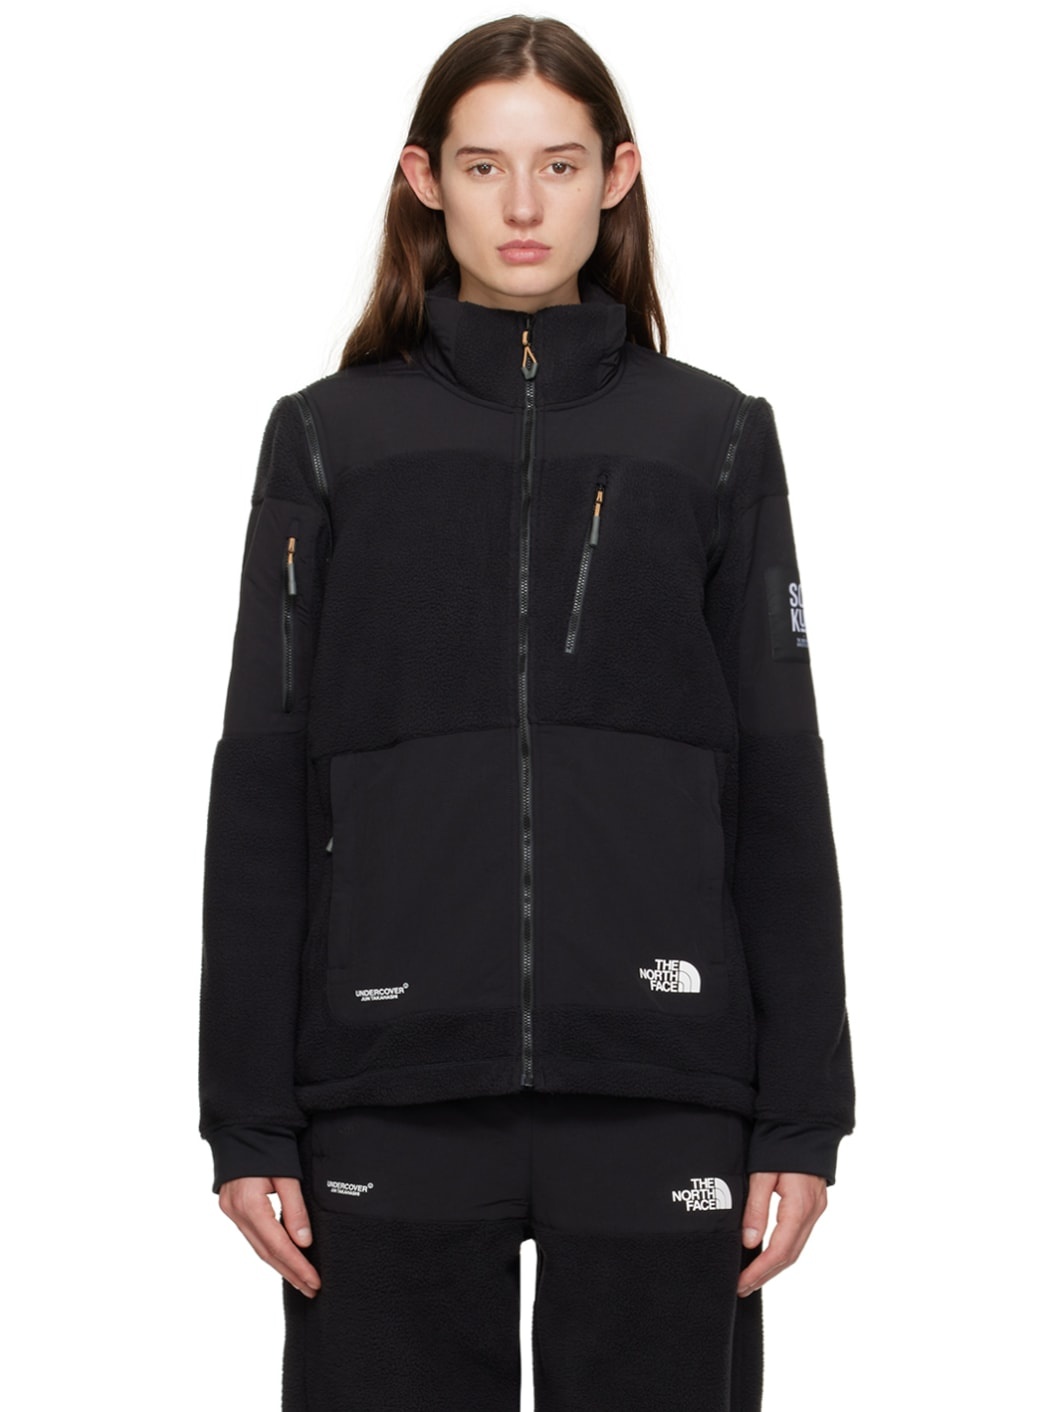 Black The North Face Edition Jacket - 1